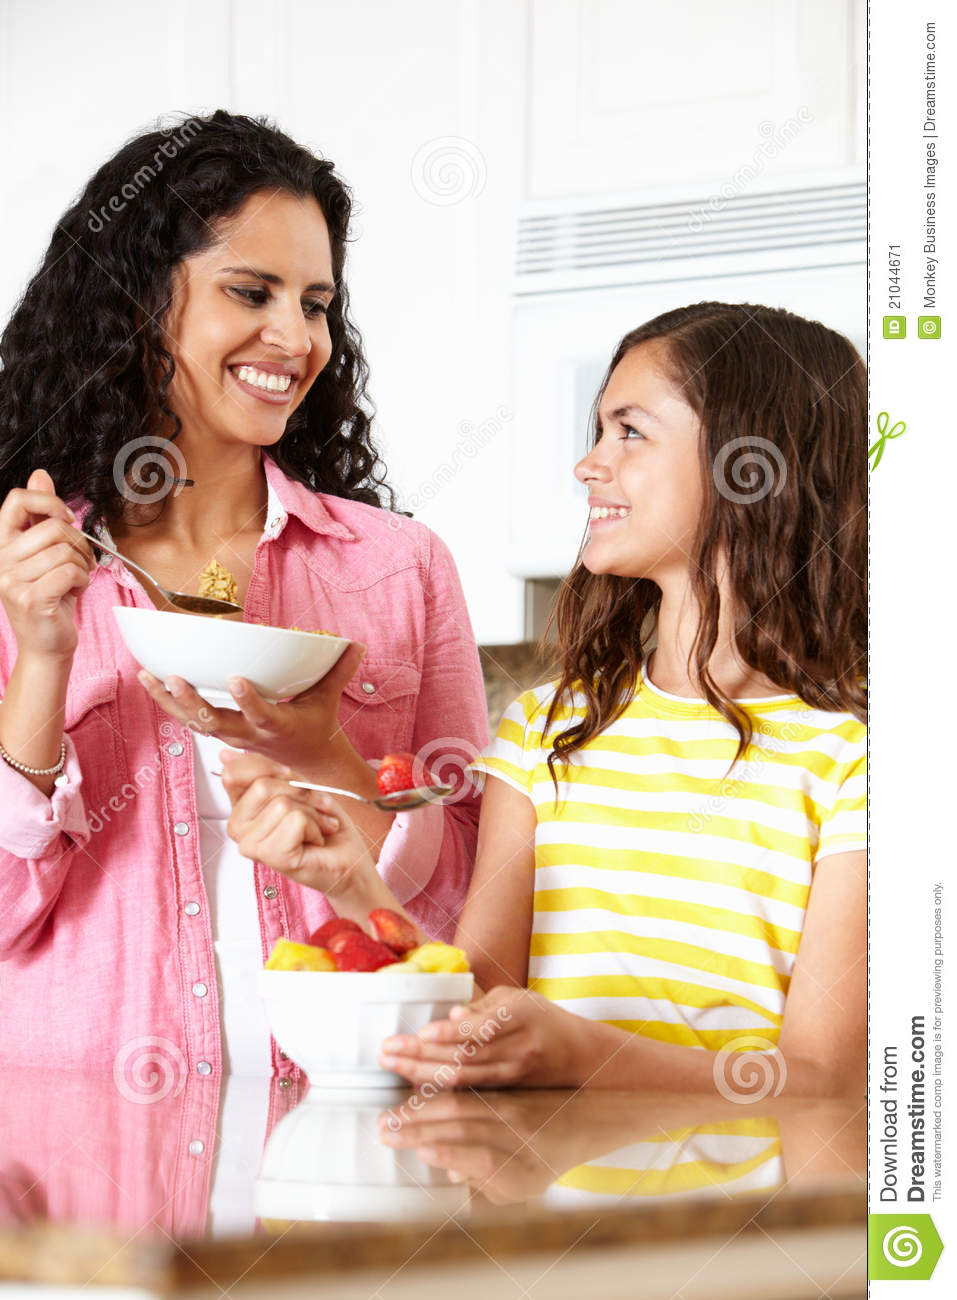 Mother And Daughter Eating Cereal And Fruit Stock Image   Image